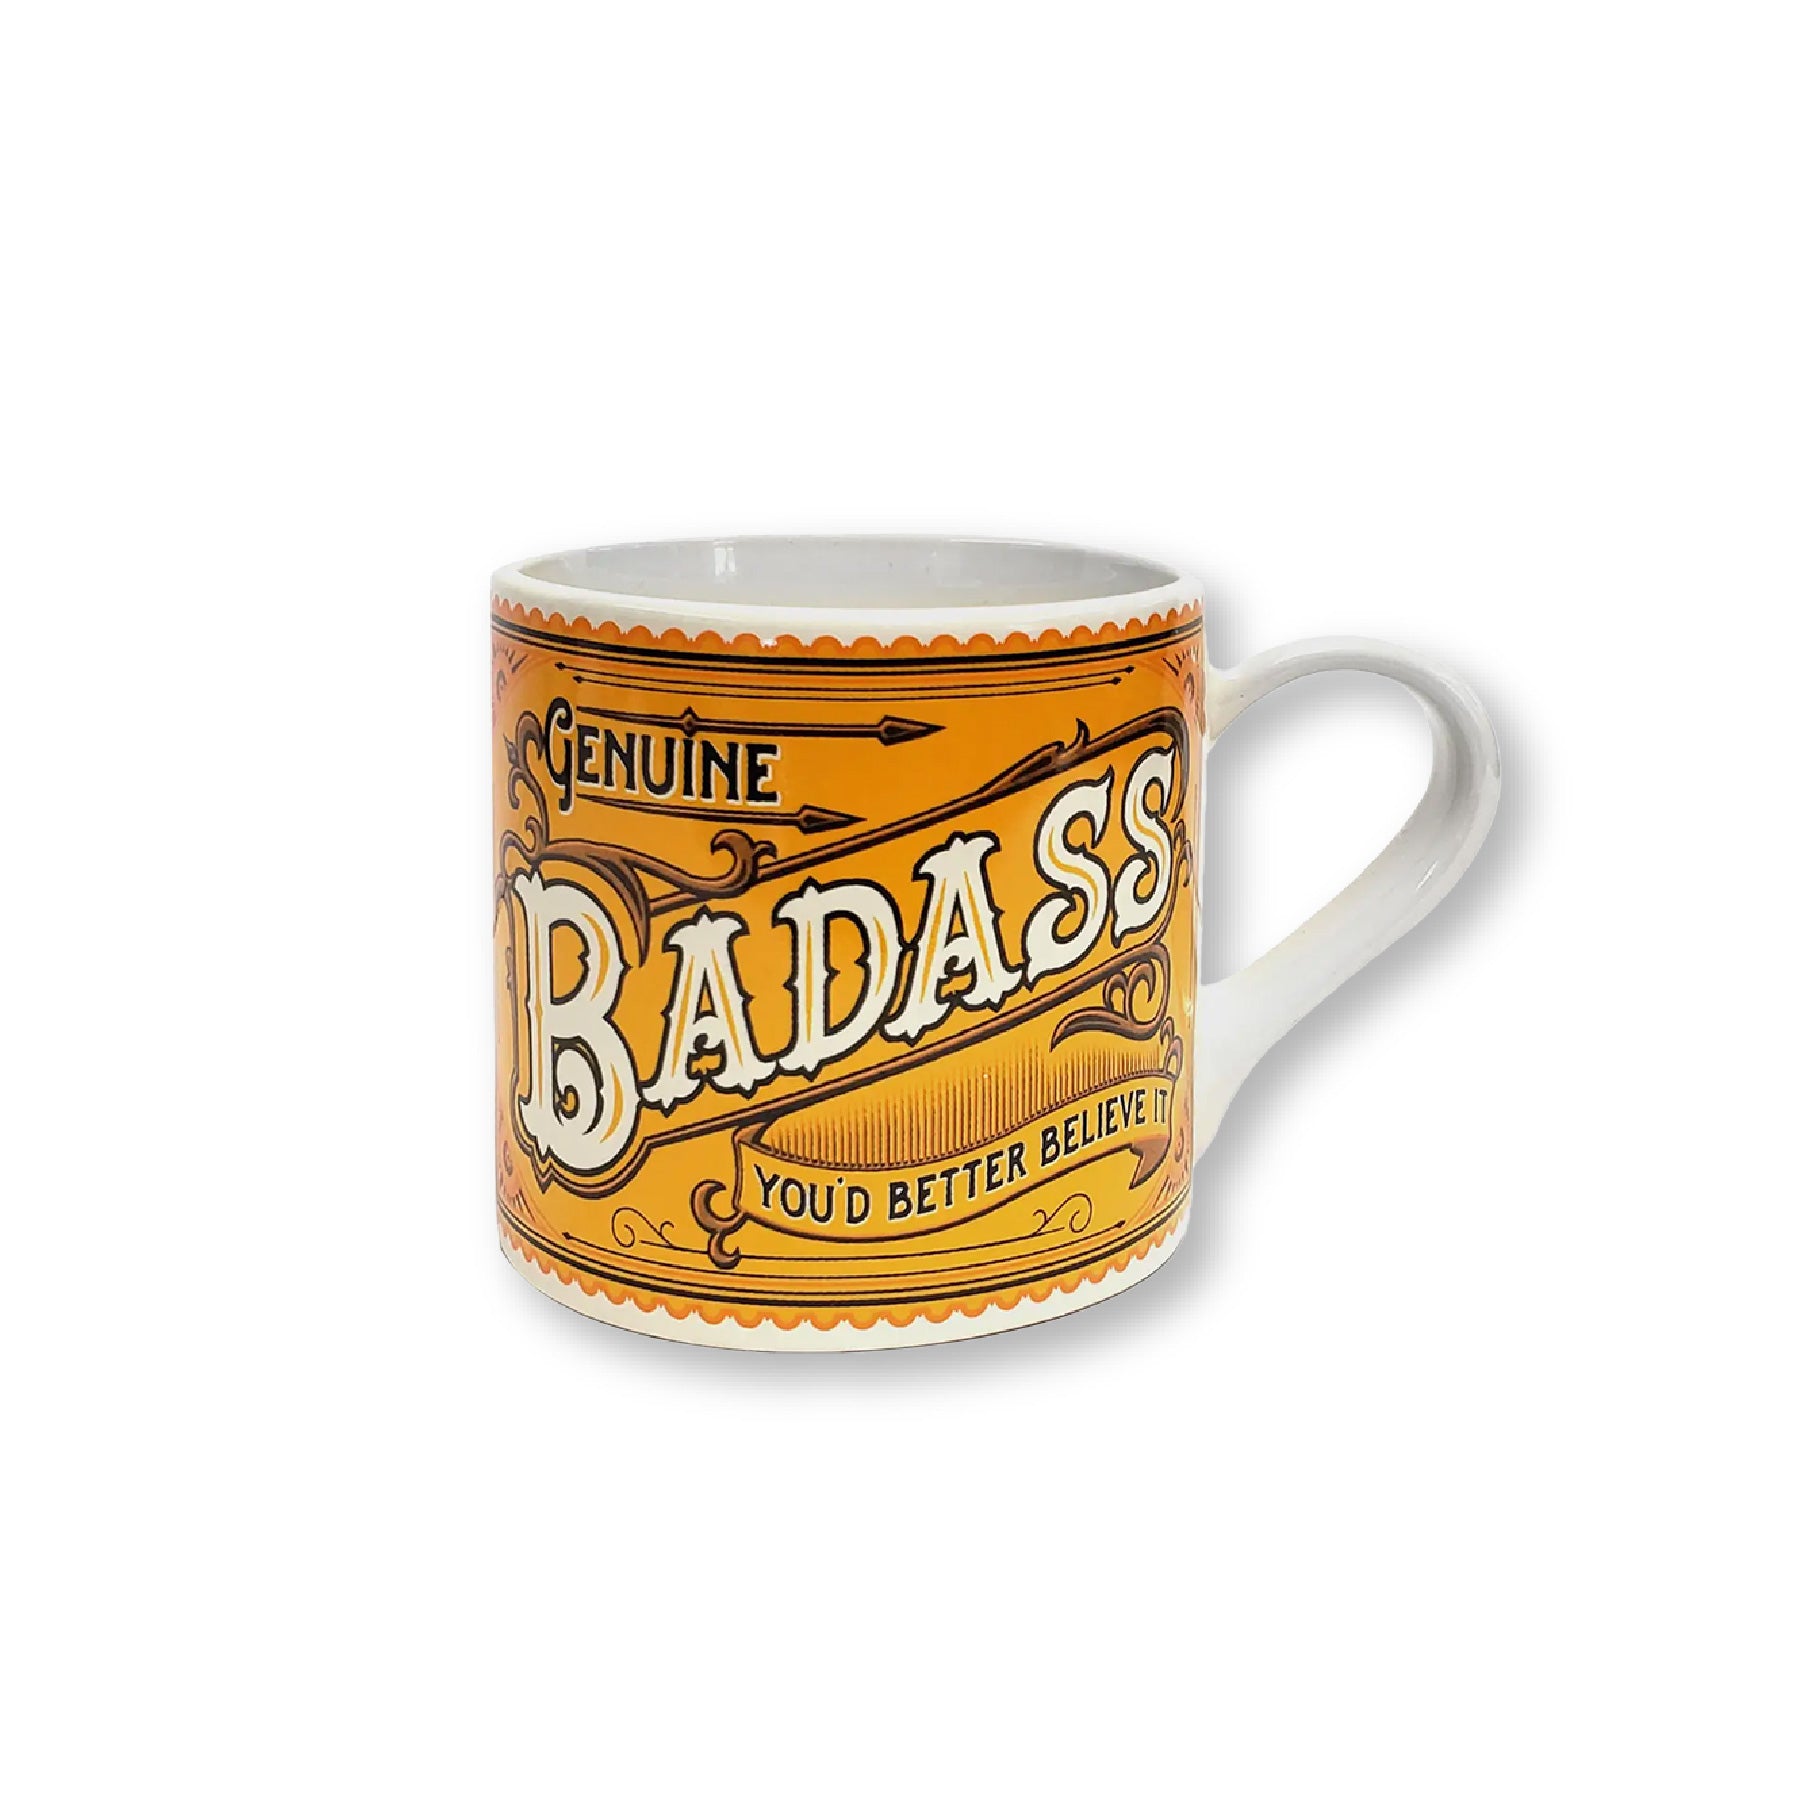 ceramic tea or coffee mug. cafe cup reads "Genuine Badass" in yellow, gold, and orange retro vintage style